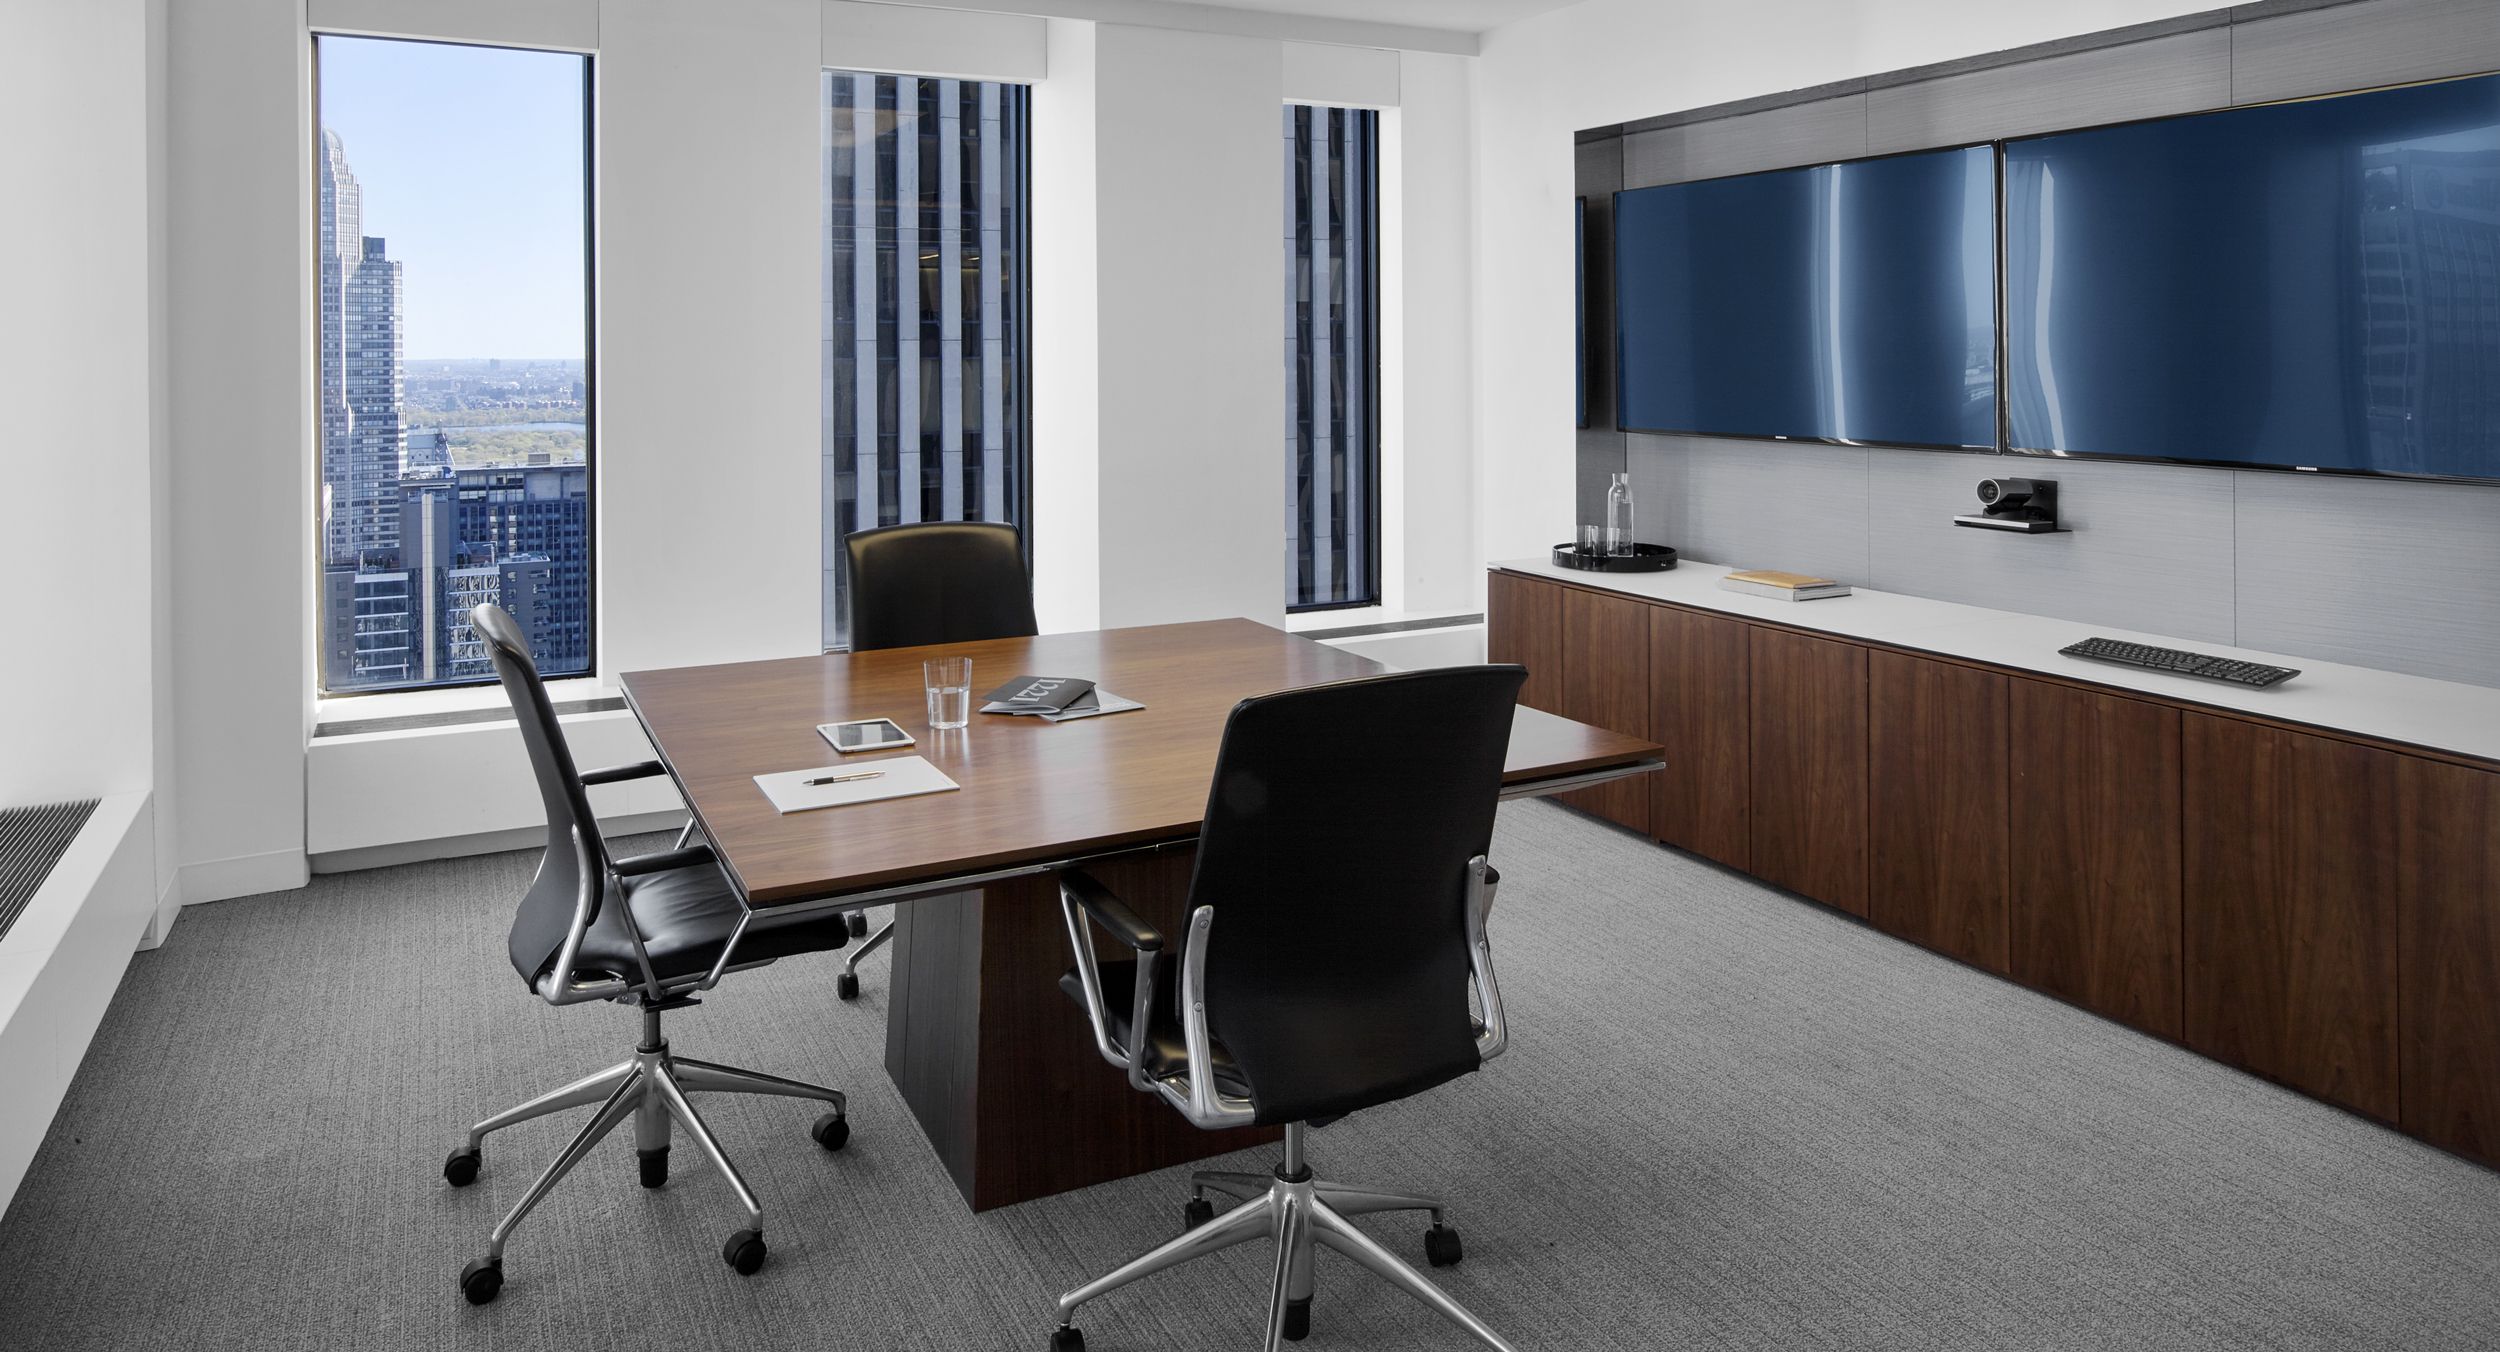 Precisely-tailored MESA tables and storage credenzas meet the exacting needs of each meeting space.